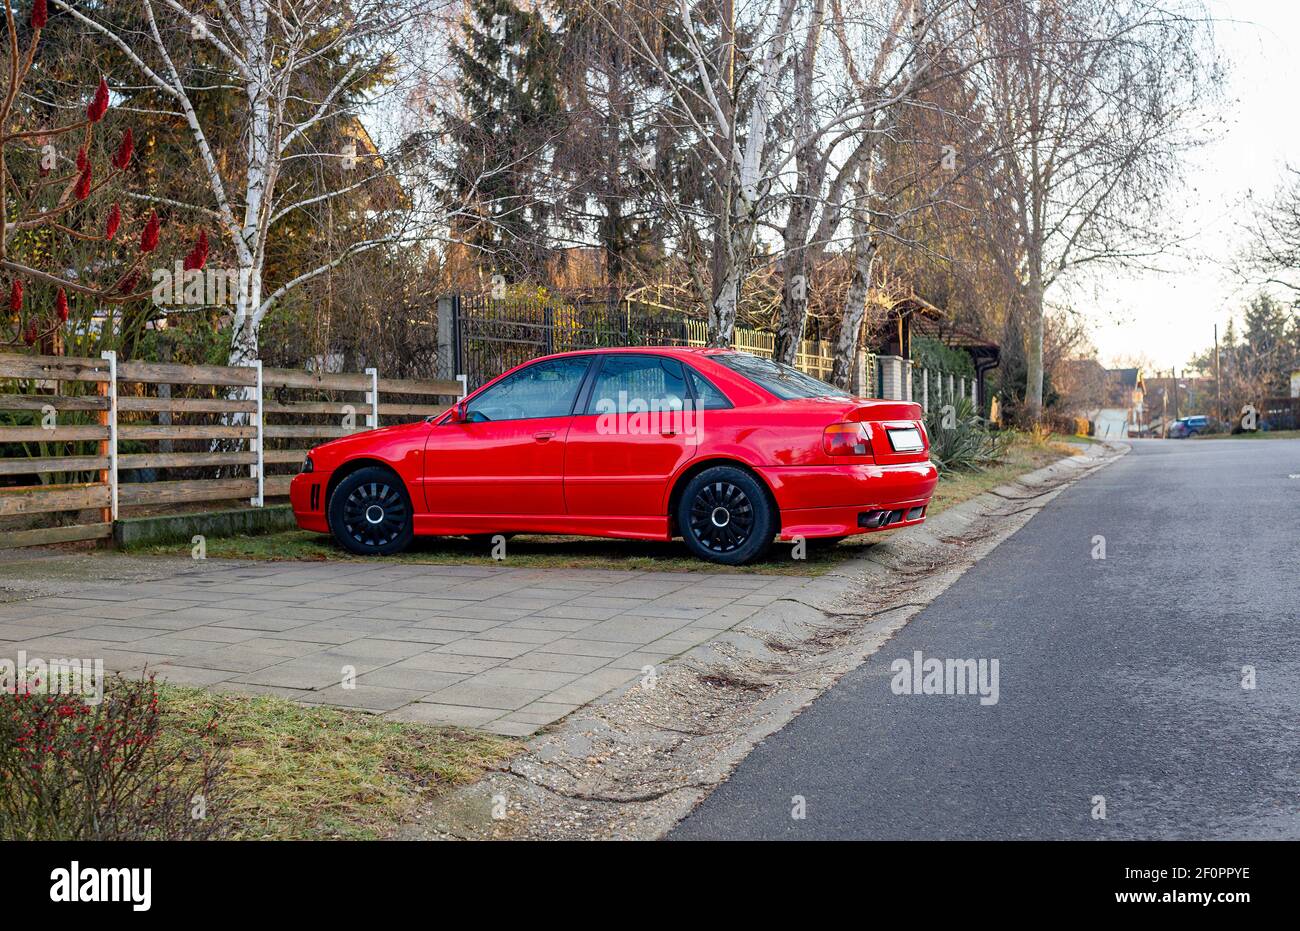 Beautiful red car parked on rural street near the fence Stock Photo